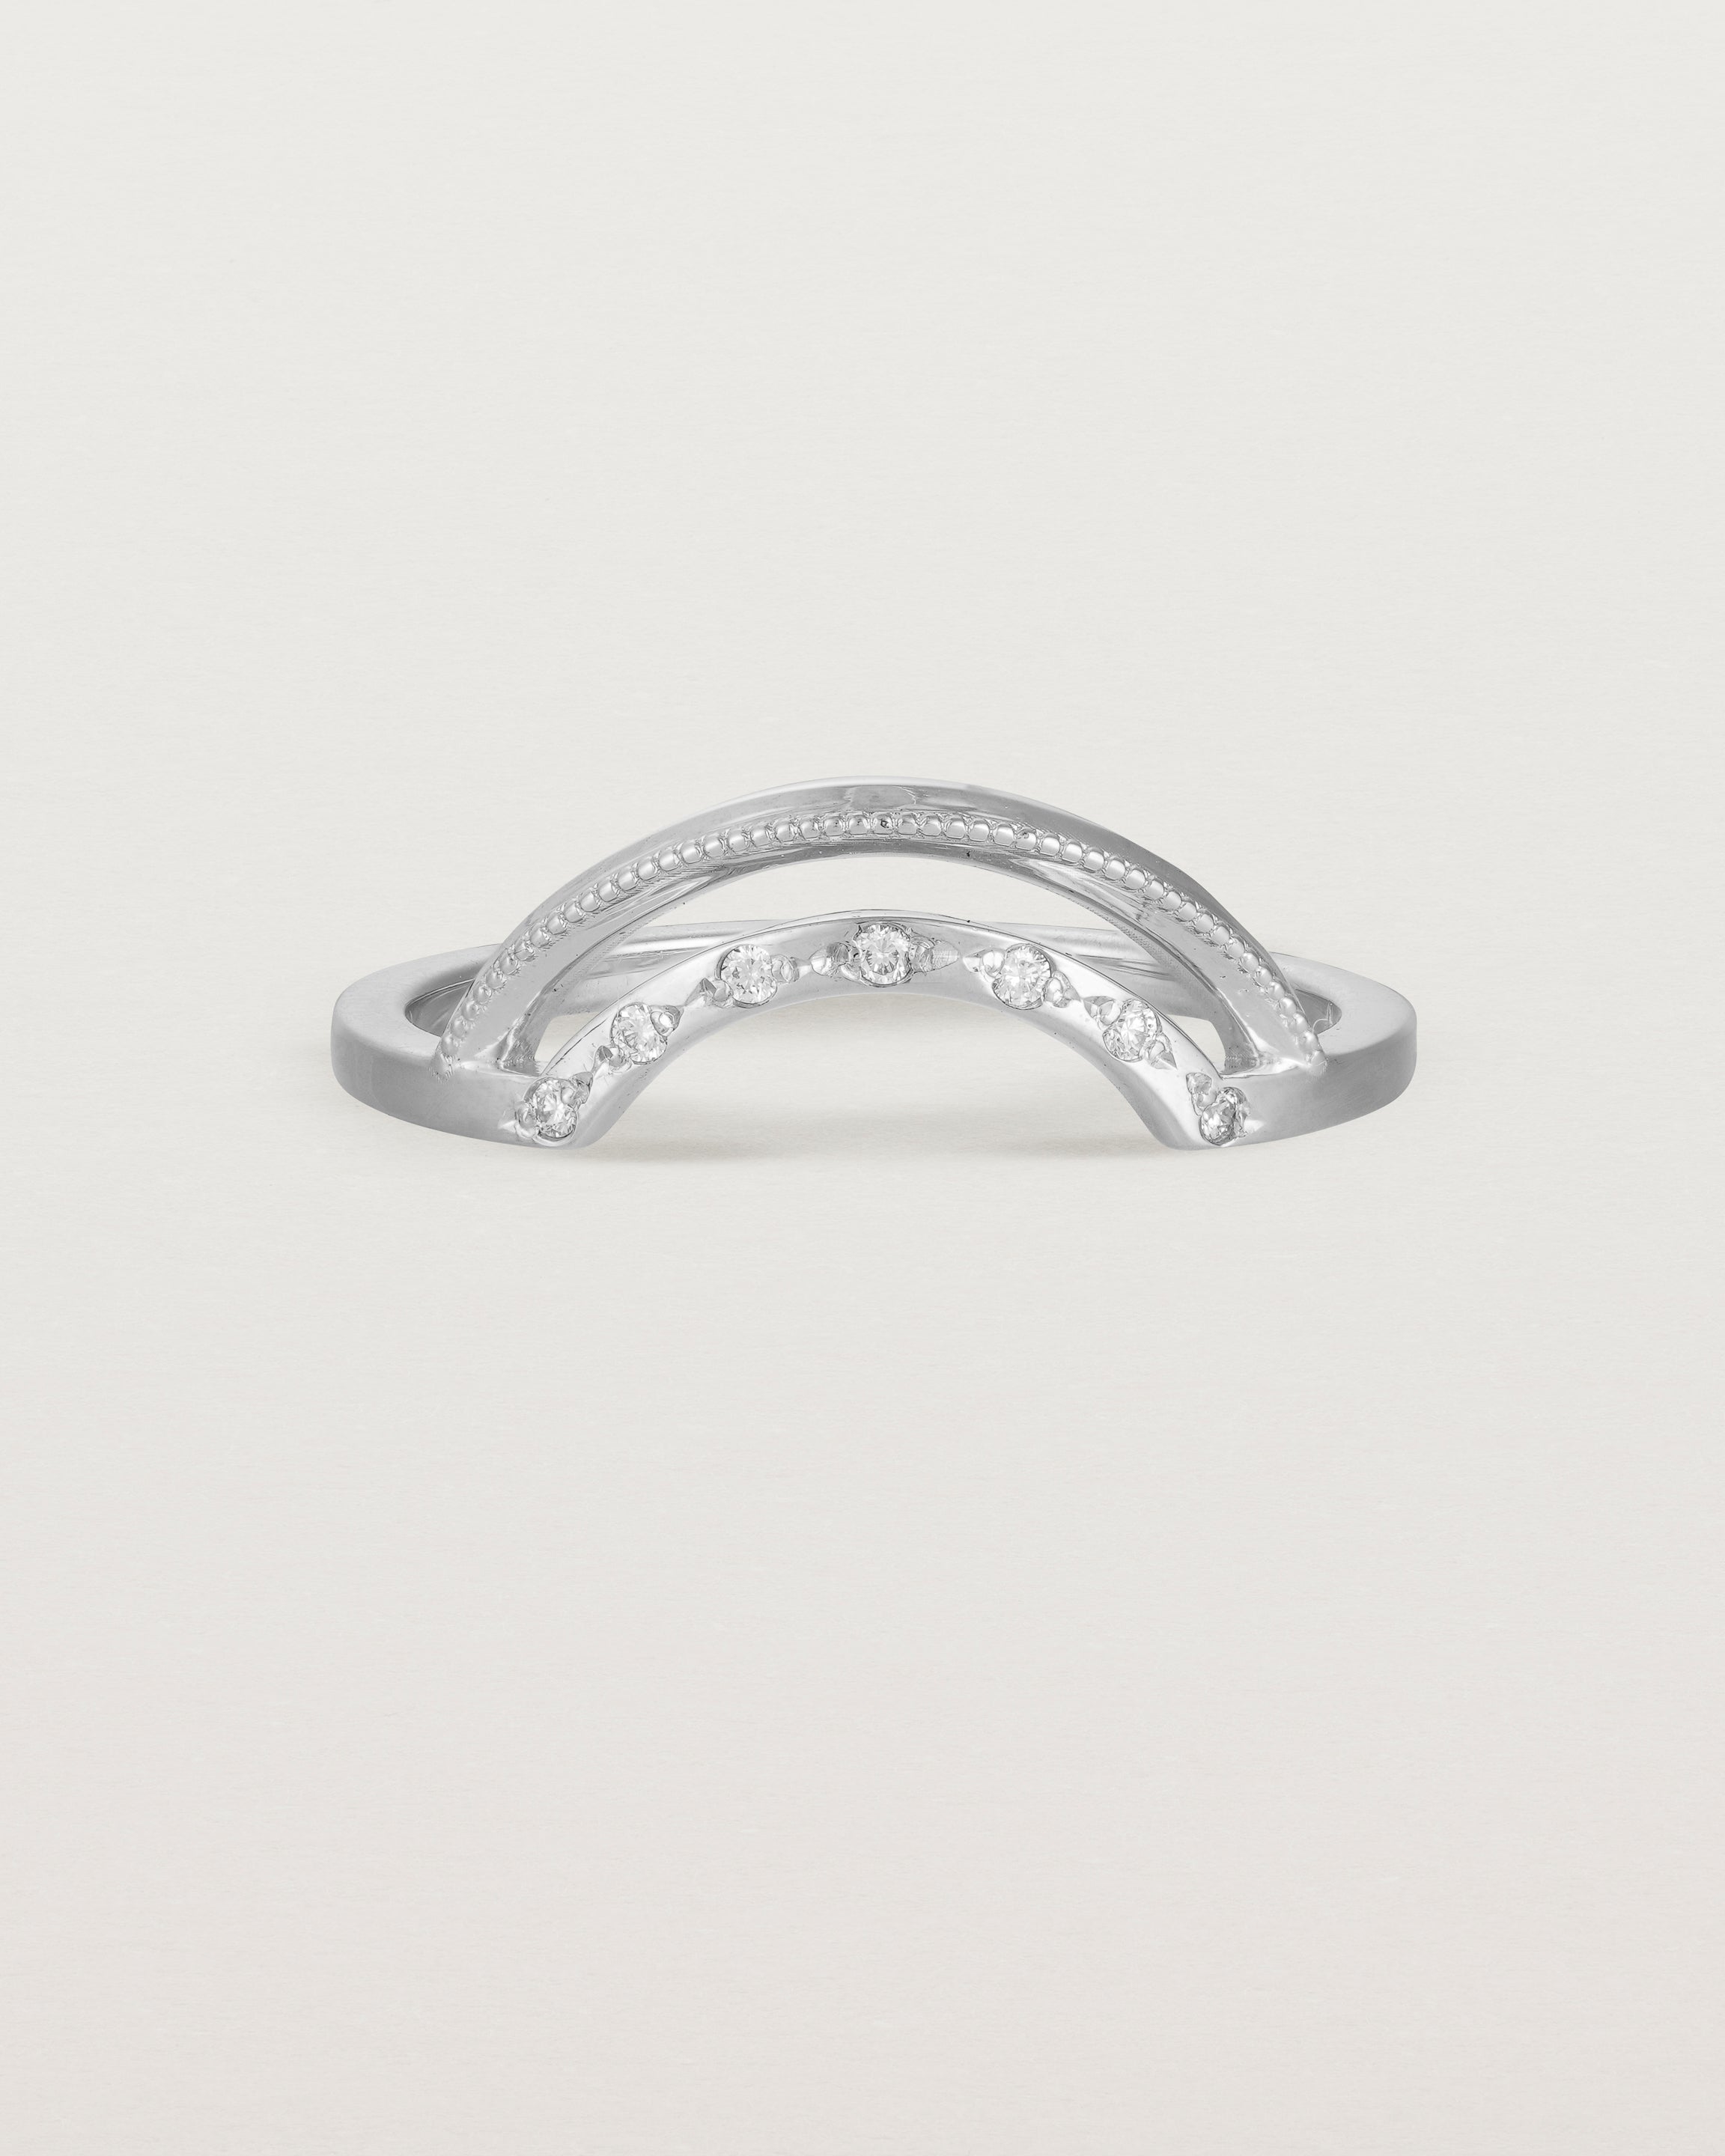 Fit four of a double arc crown ring with white diamonds adoring the inner arc - crafted in white gold.